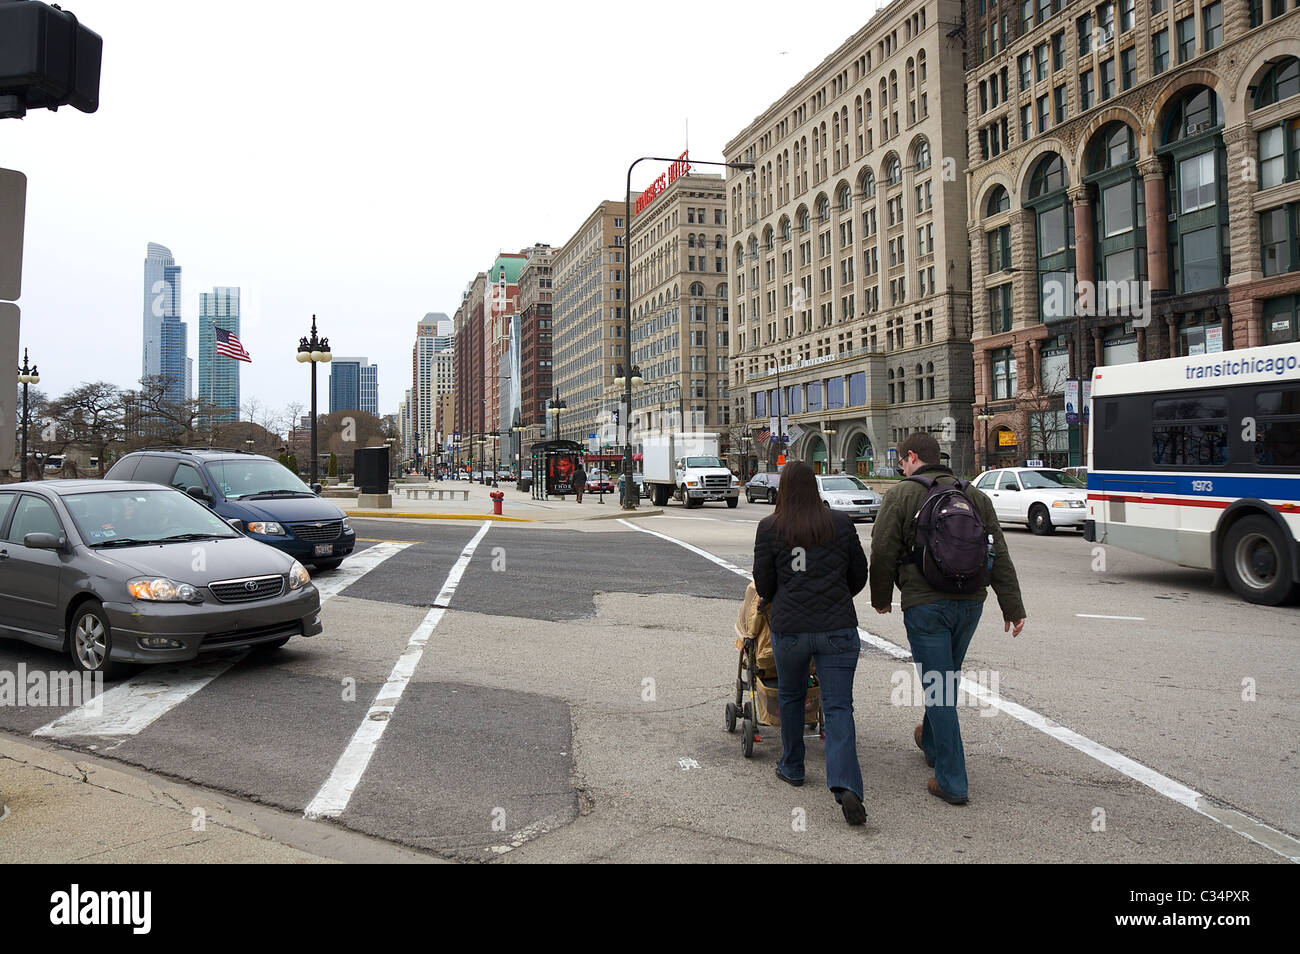 Pedestrians cross at an intersection in downtown Chicago Stock Photo